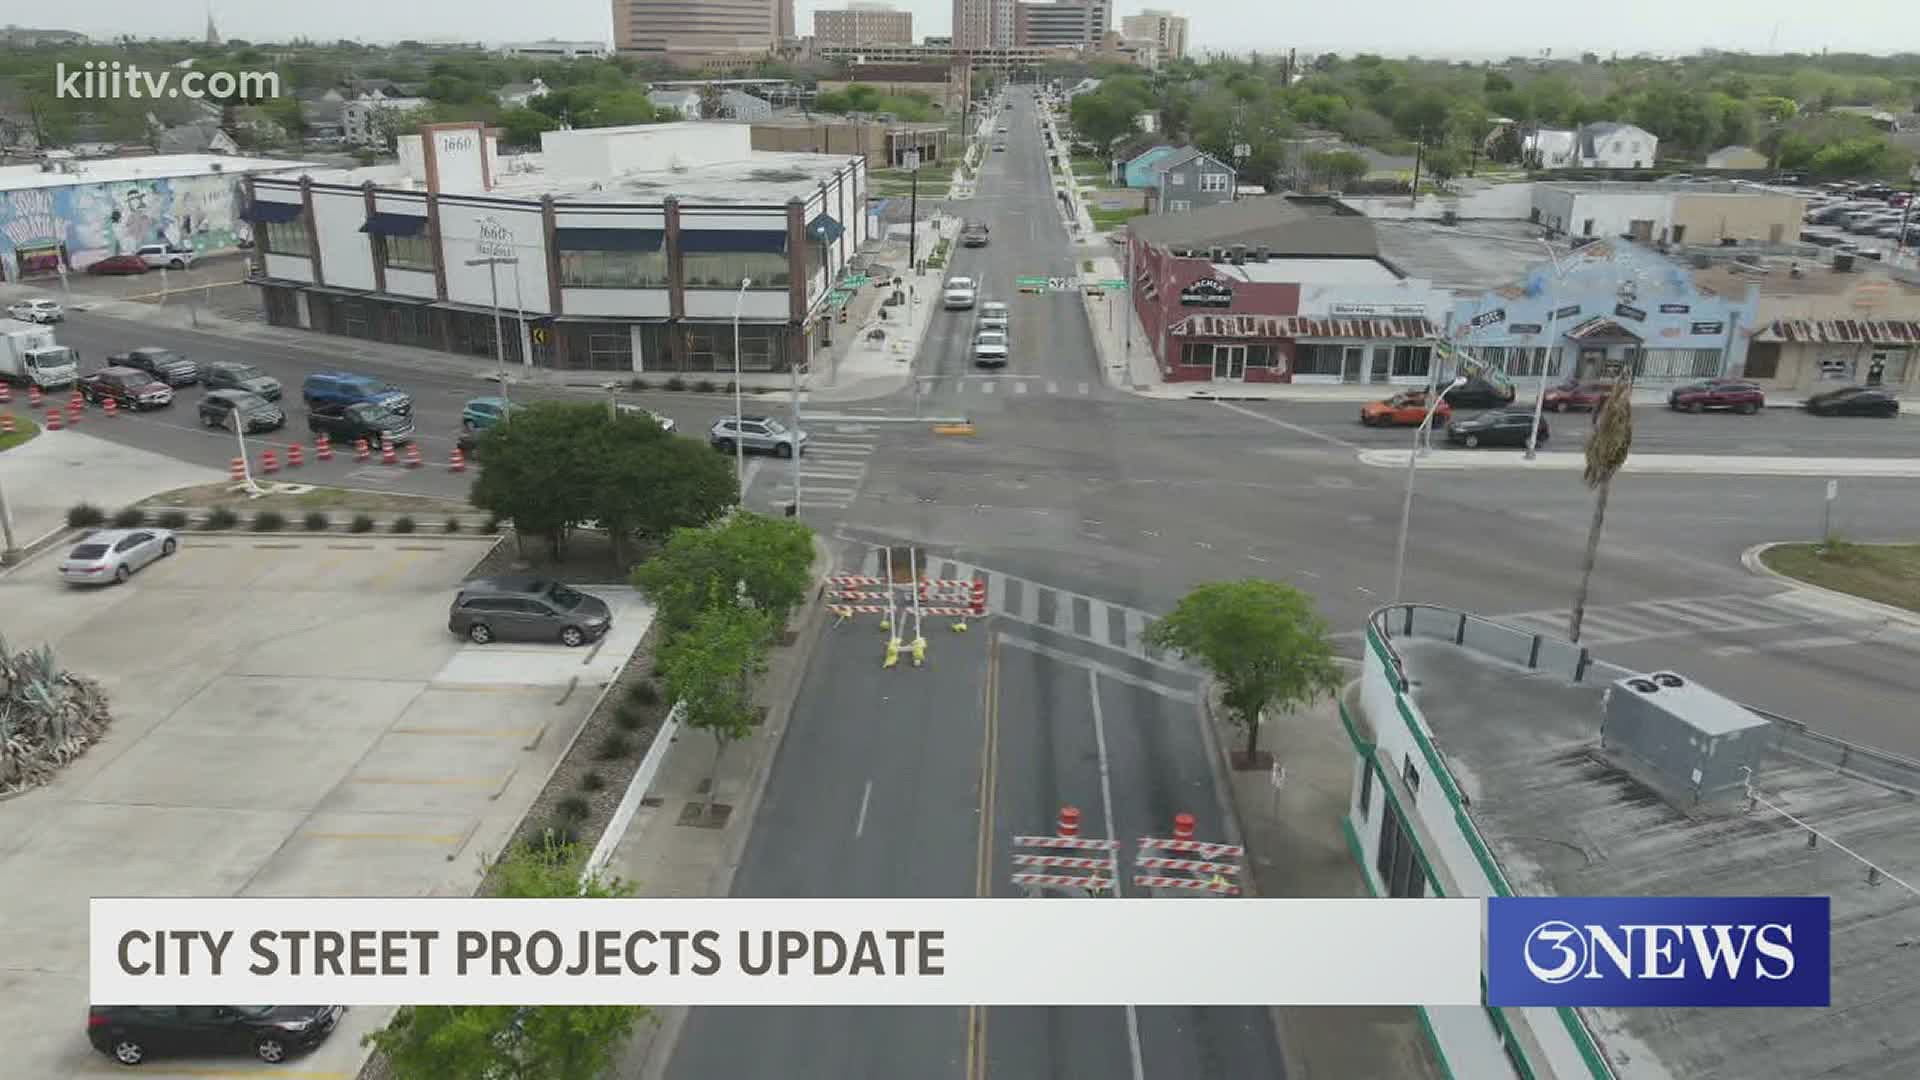 Streets that remain under construction include Ocean Drive, Airline, and Six Points.